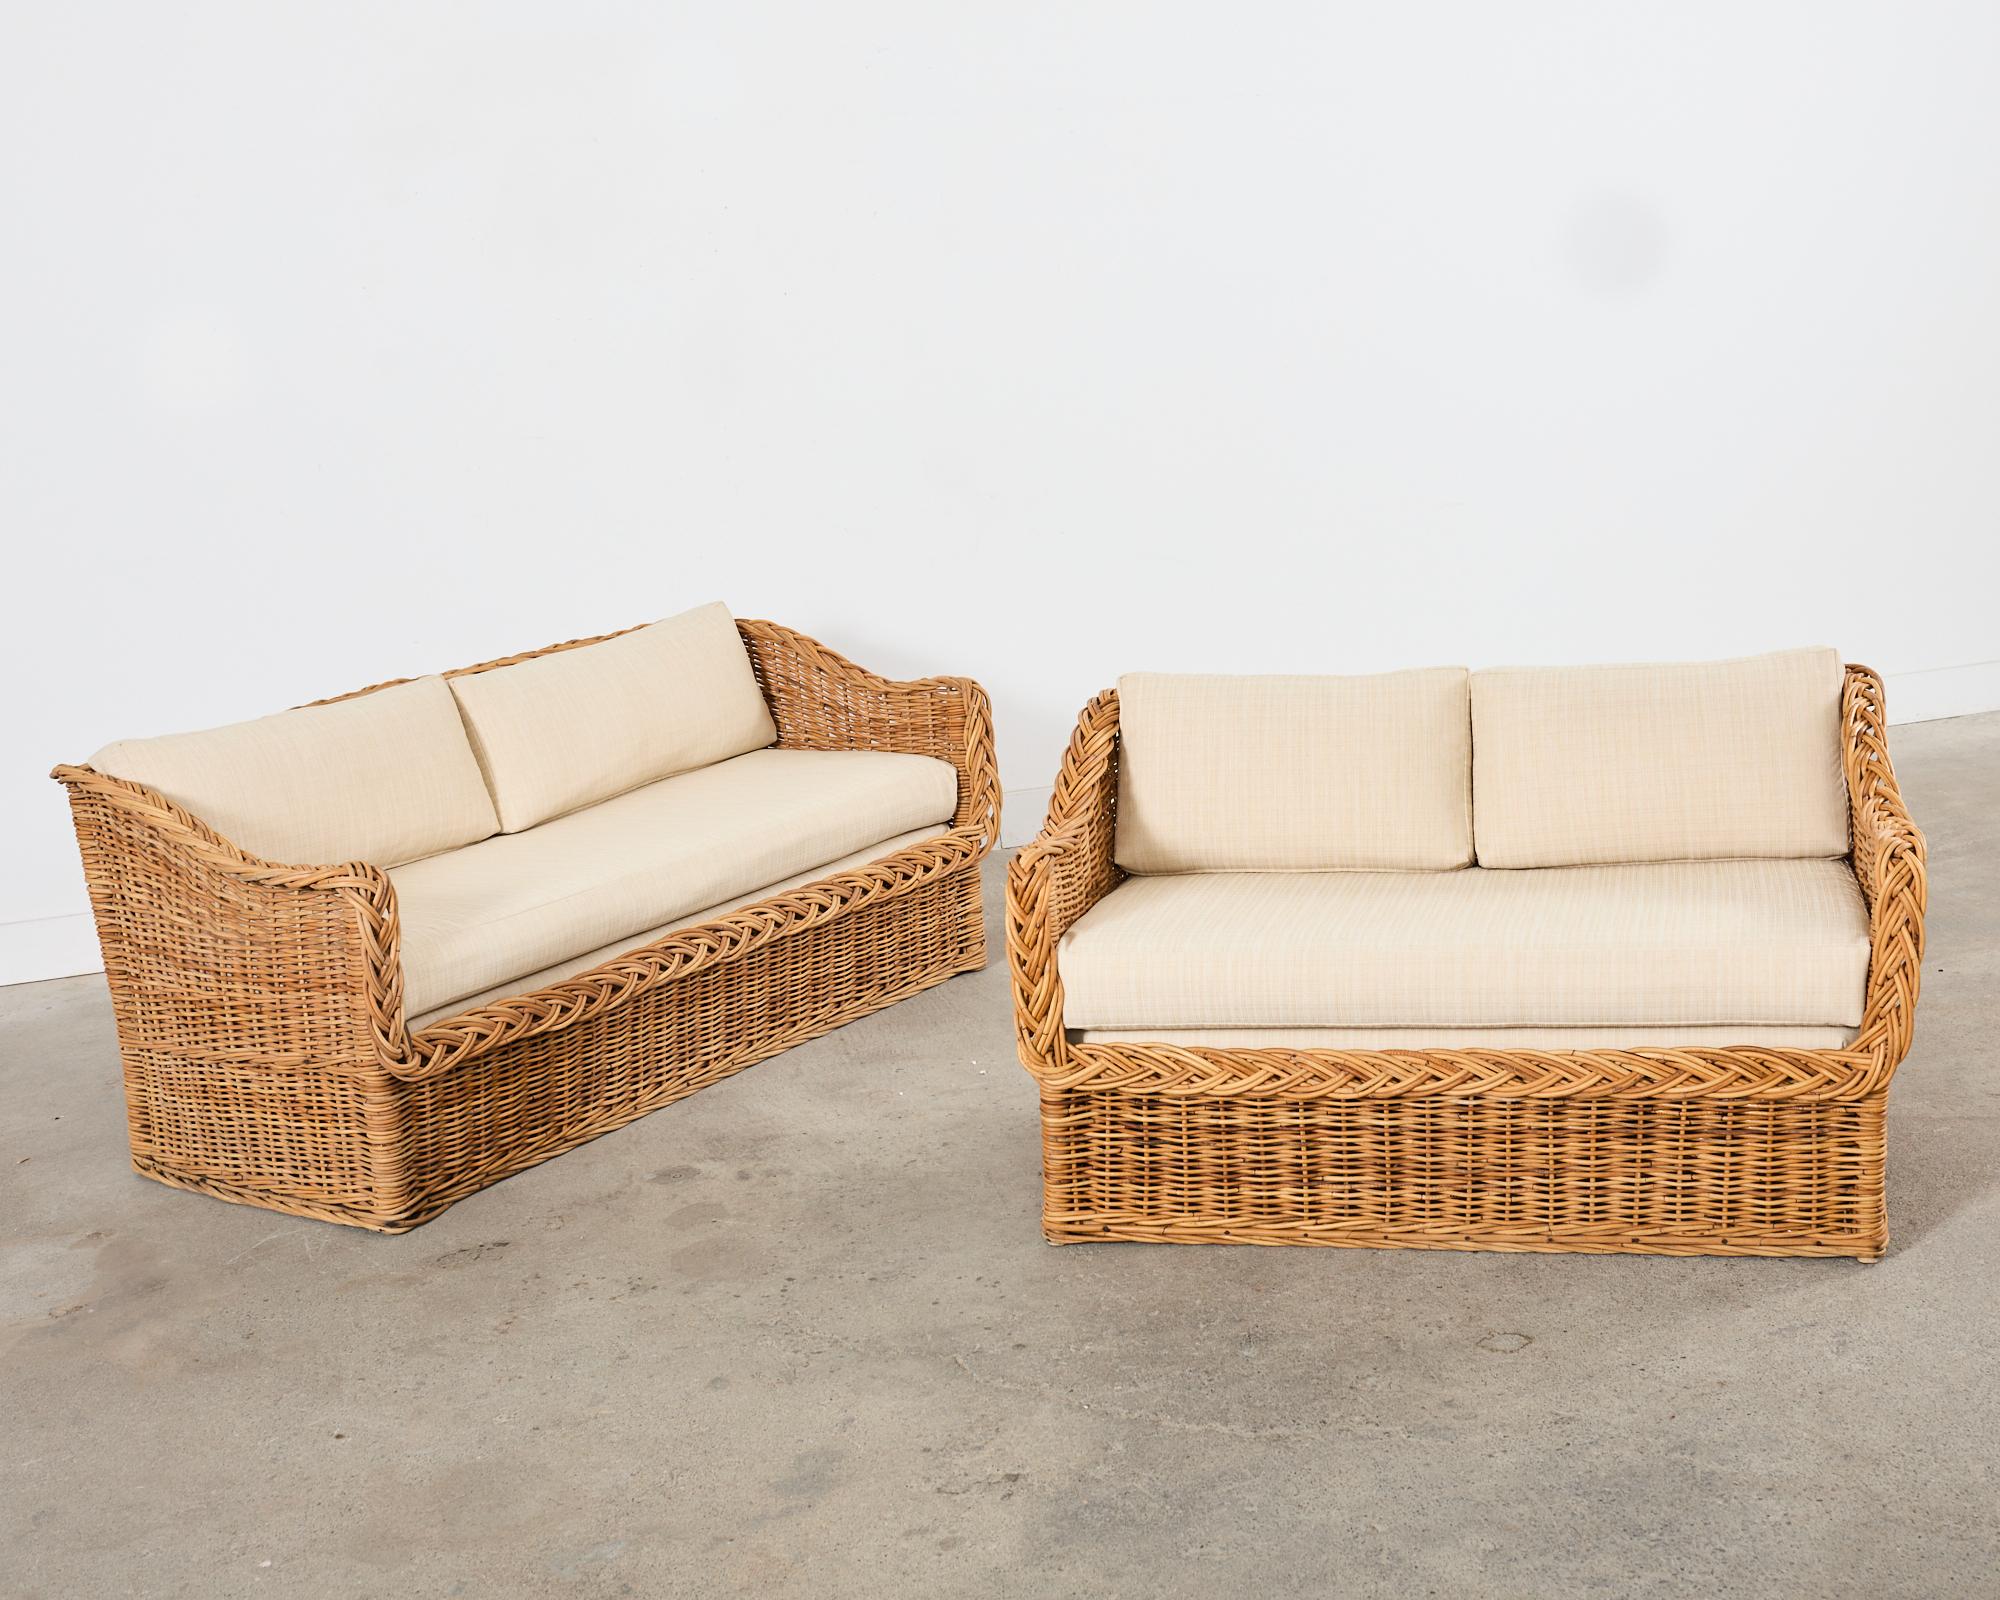 Michael Taylor Style Wicker Rattan Sofa and Settee by Wicker Works In Good Condition For Sale In Rio Vista, CA